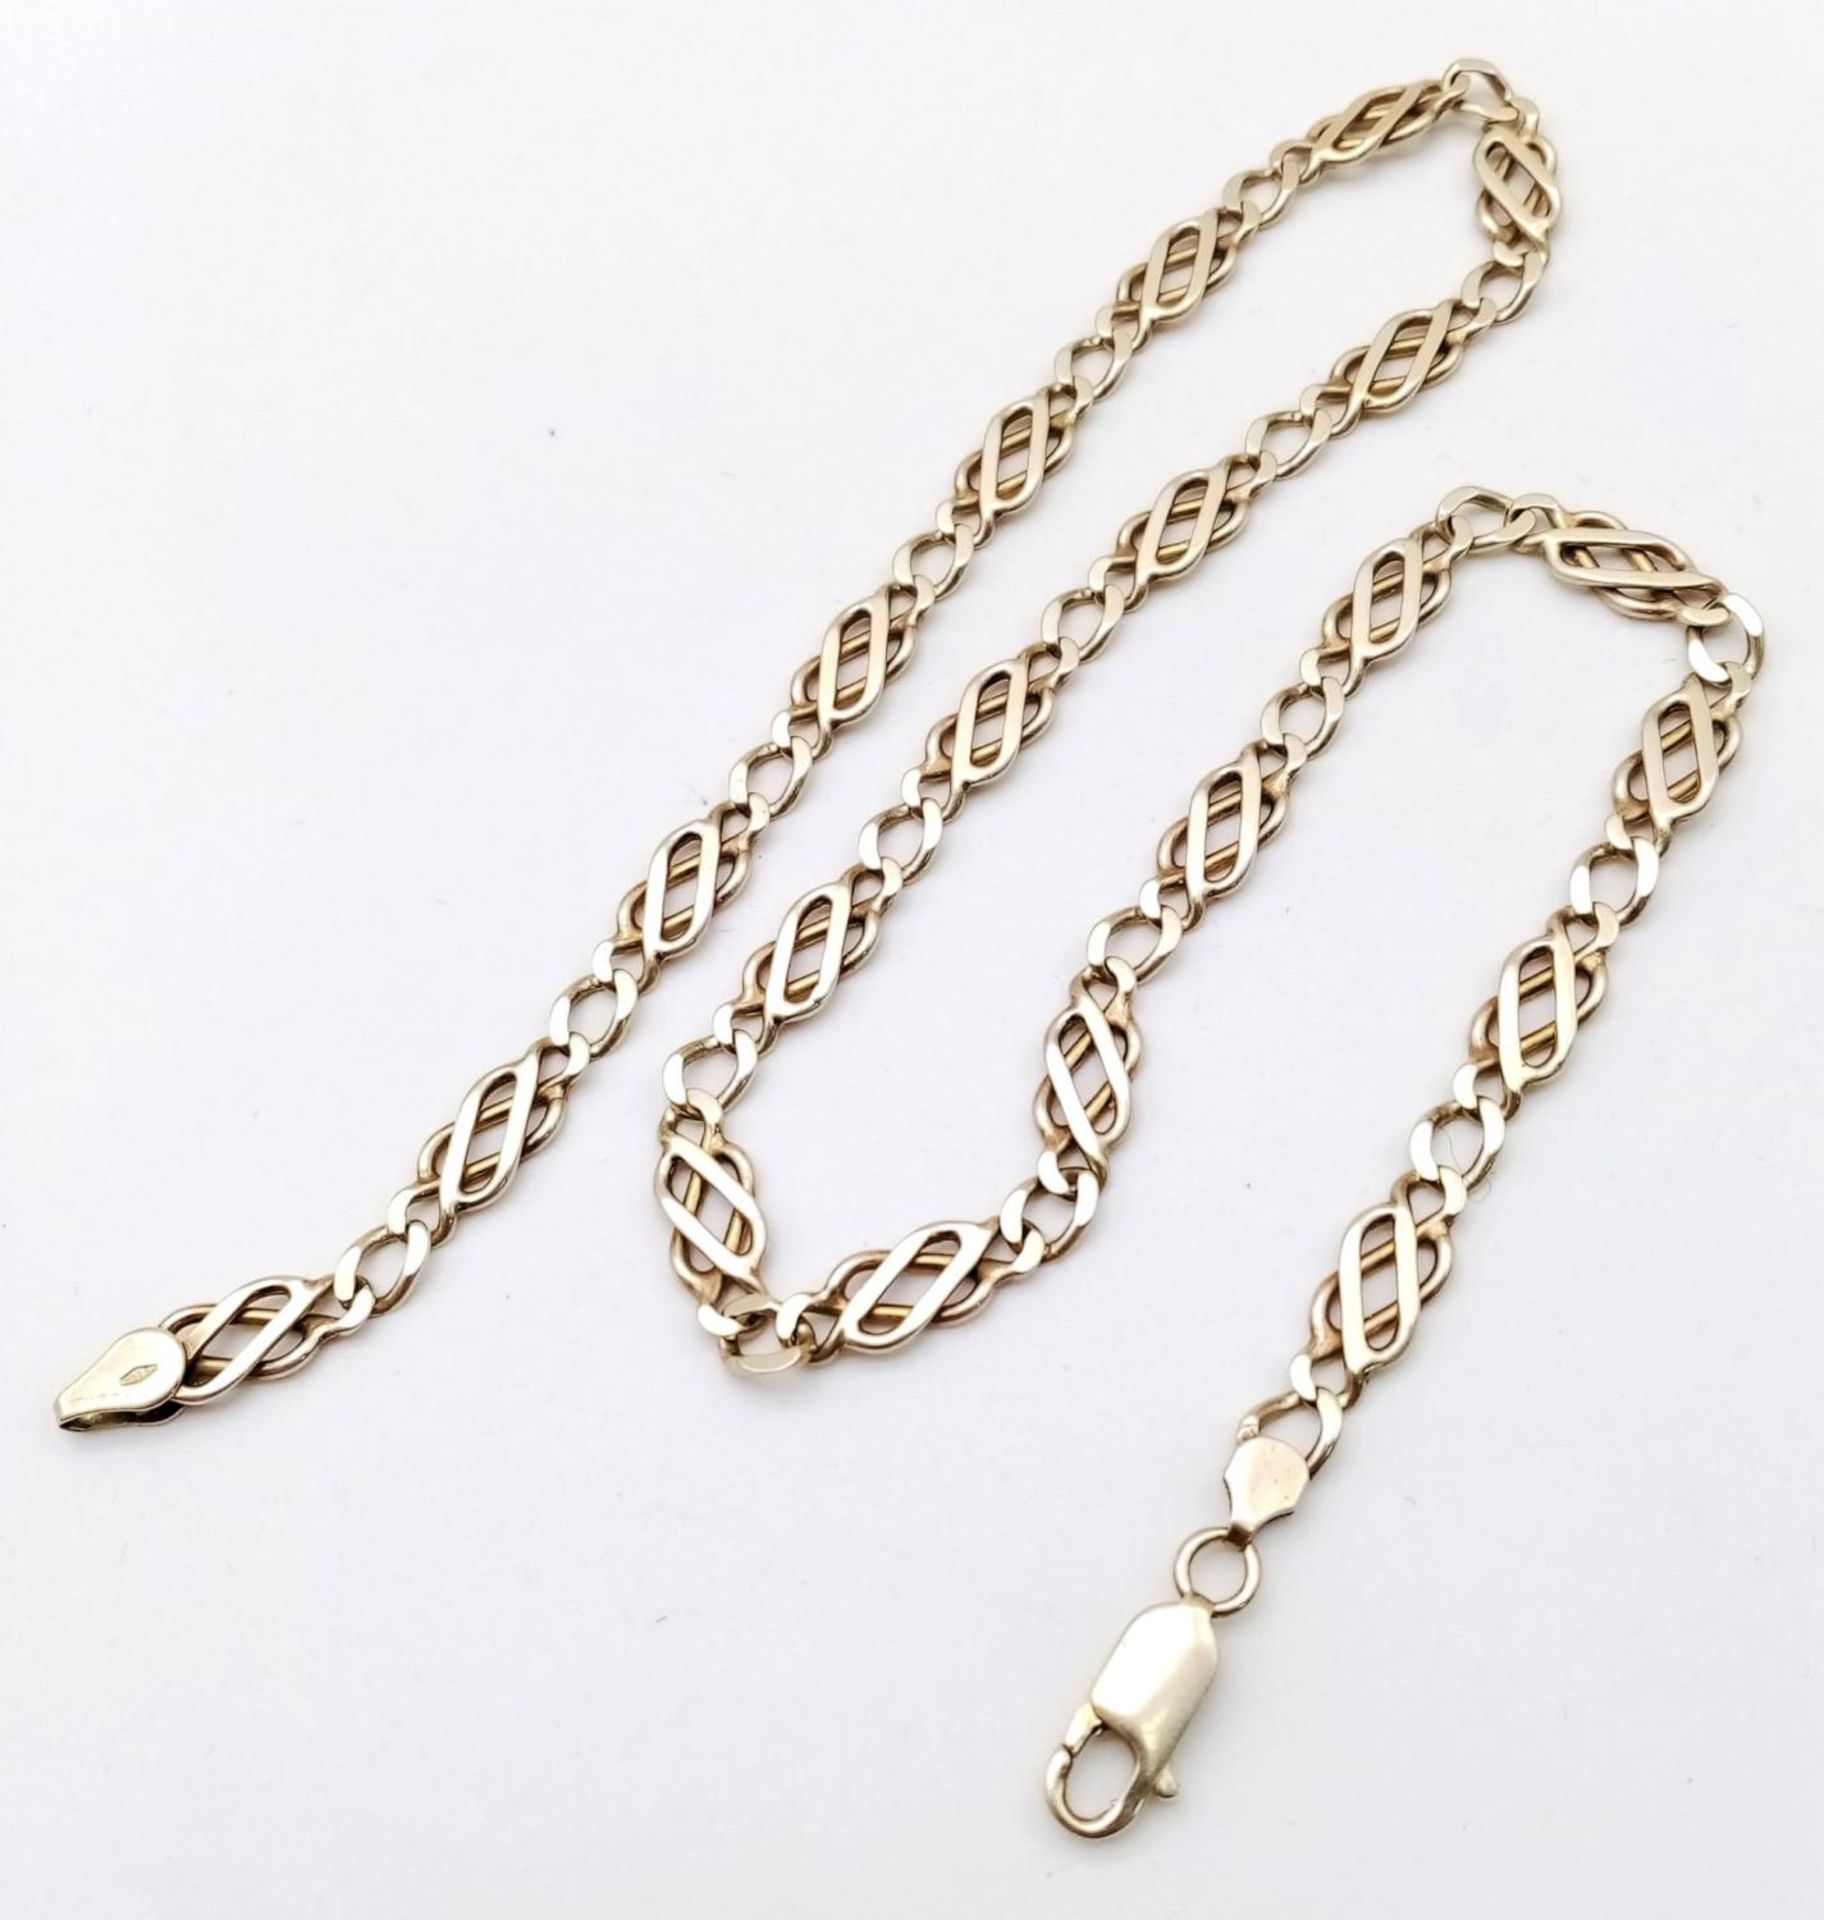 A 9k yellow gold fancy link chain. 17" length. 16.8g - Image 2 of 4